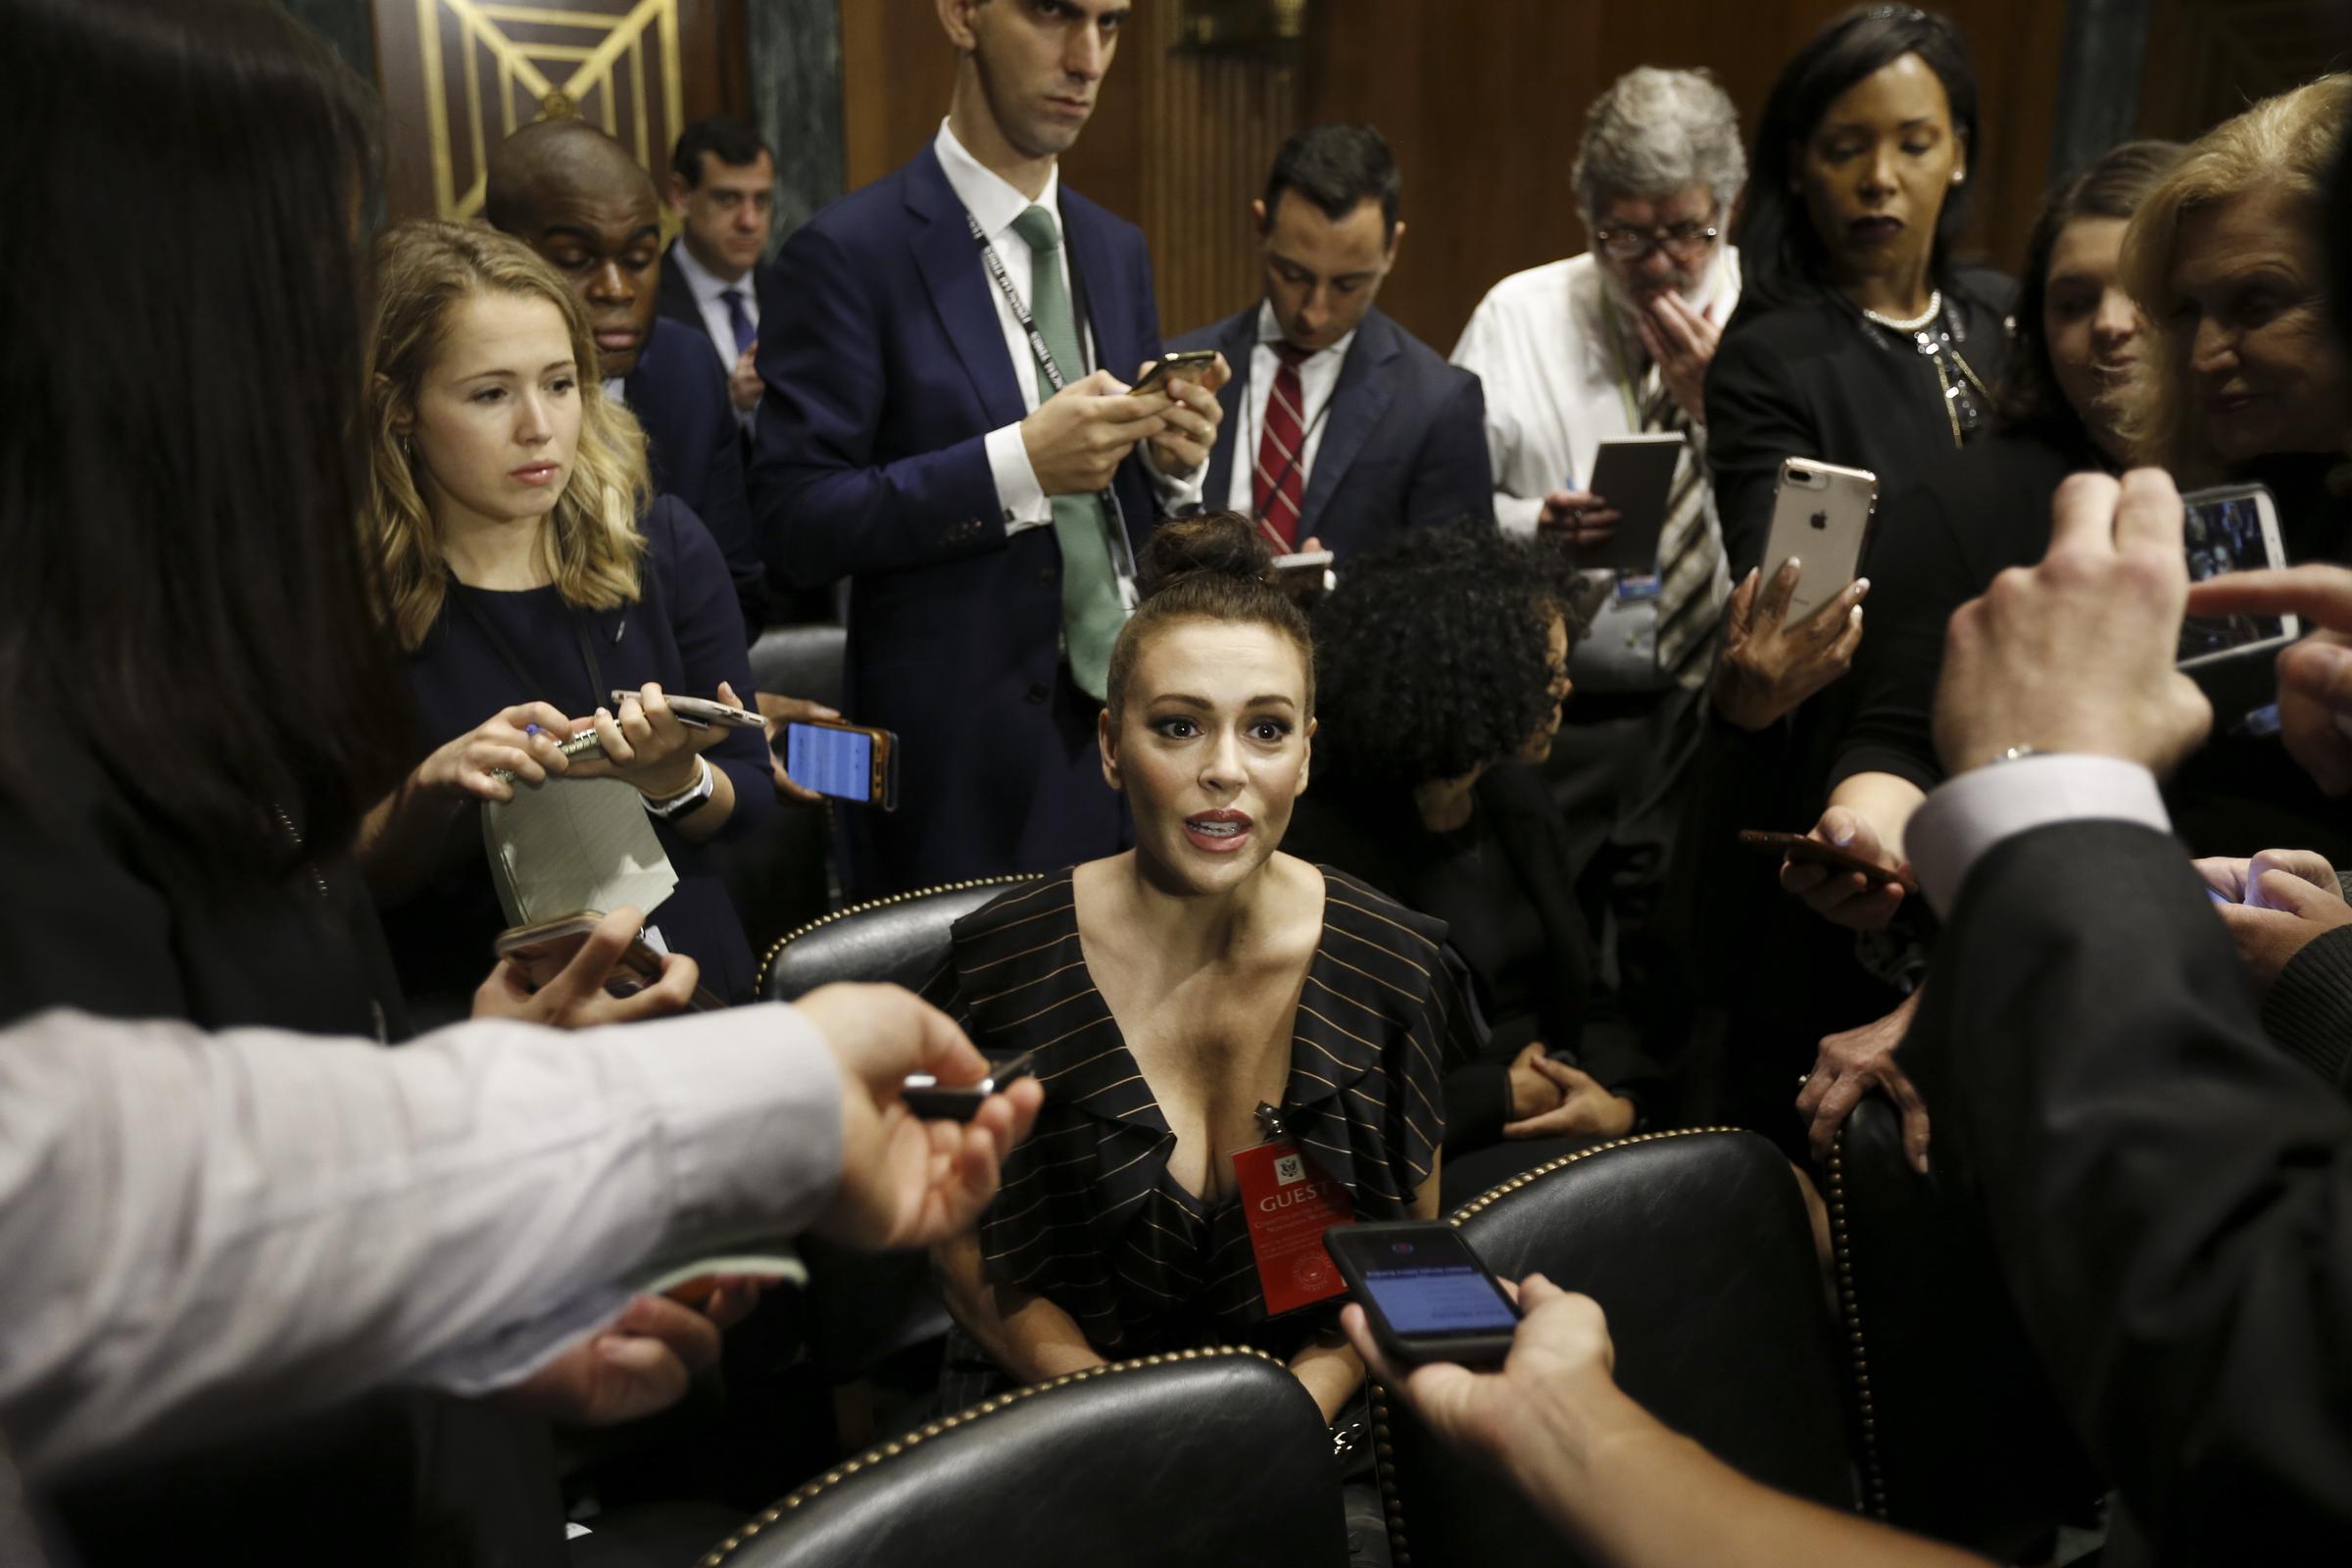 Alyssa Milano speaks to members of the media before the start of a Senate Judiciary Committee hearing in Washington, D.C., U.S., on September, 27, 2018. | Source: Getty Images